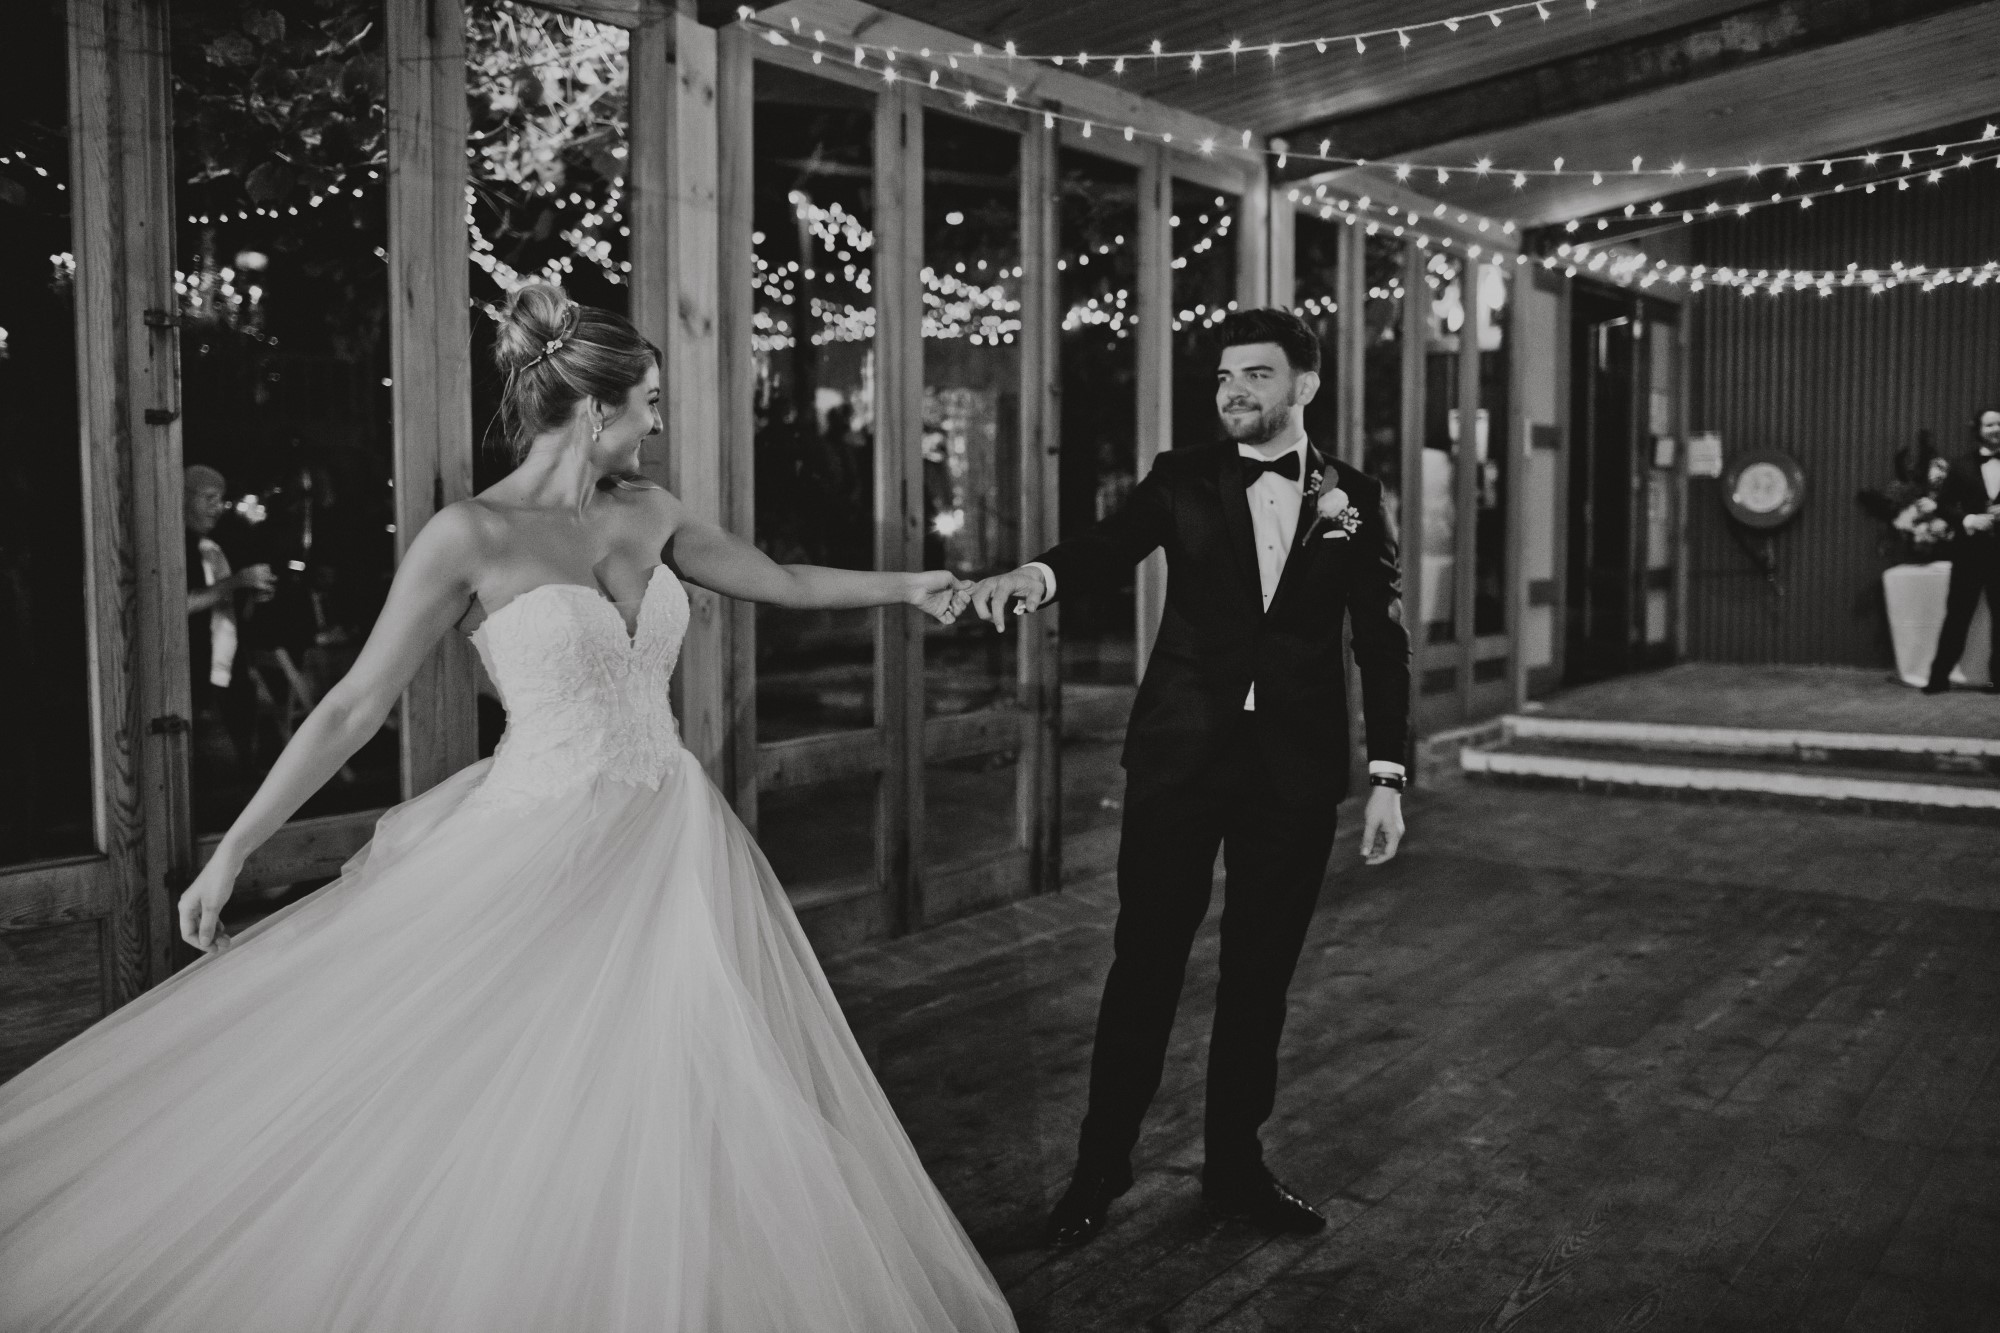 Black and white photo of bride and groom dancing together at a wedding reception with string lights above them